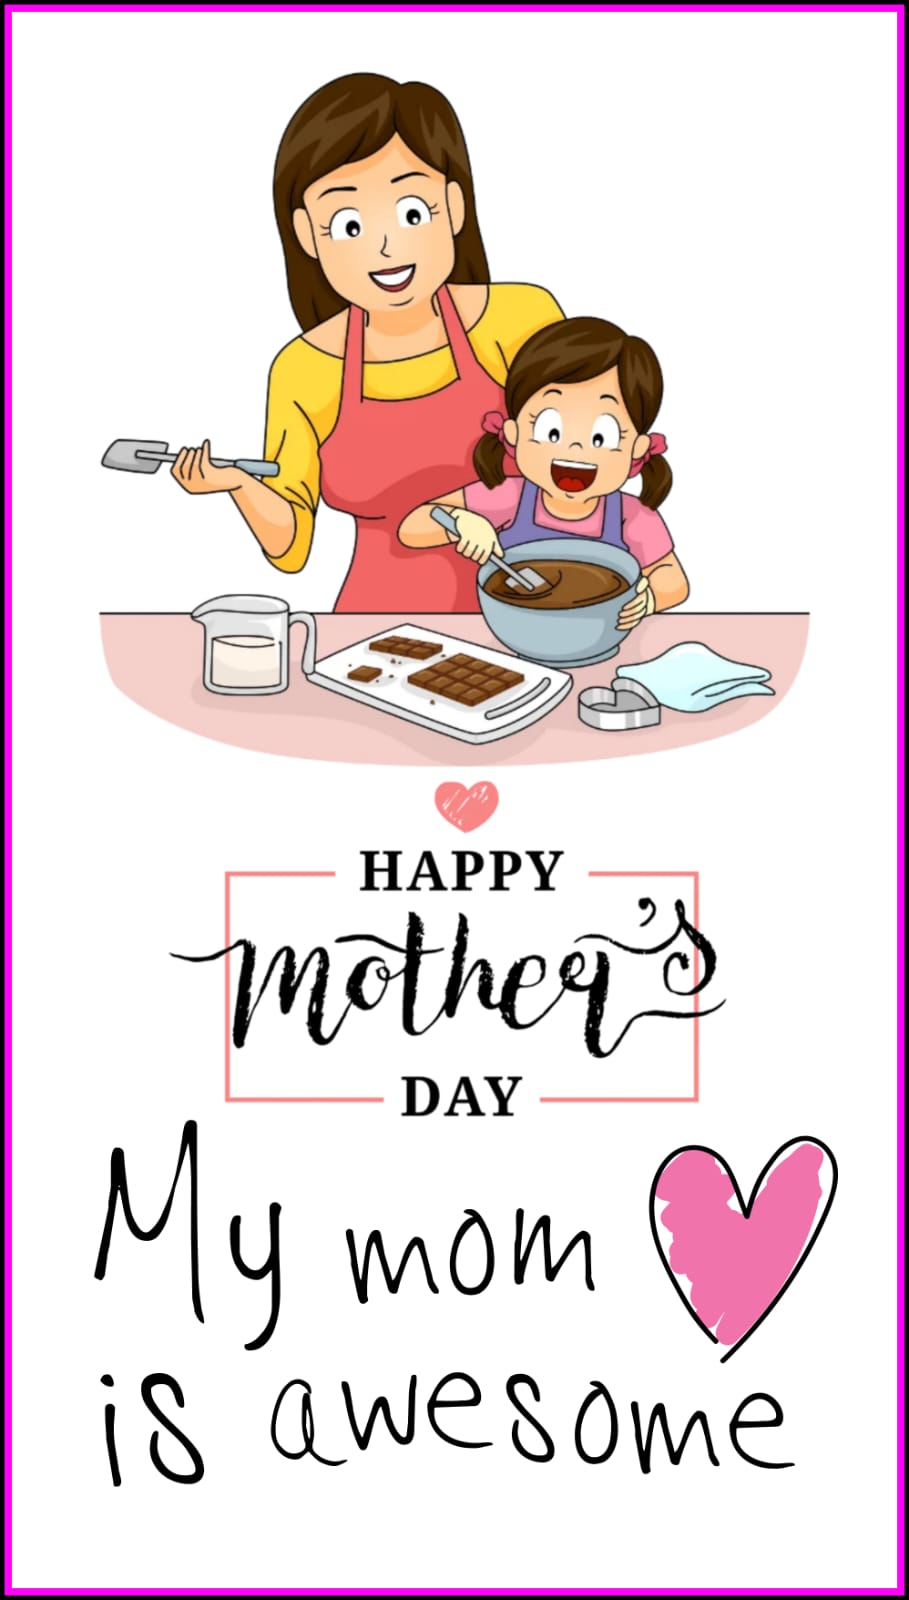 Happy Mother's Day wishes images in Hindi | हैप्पी ...